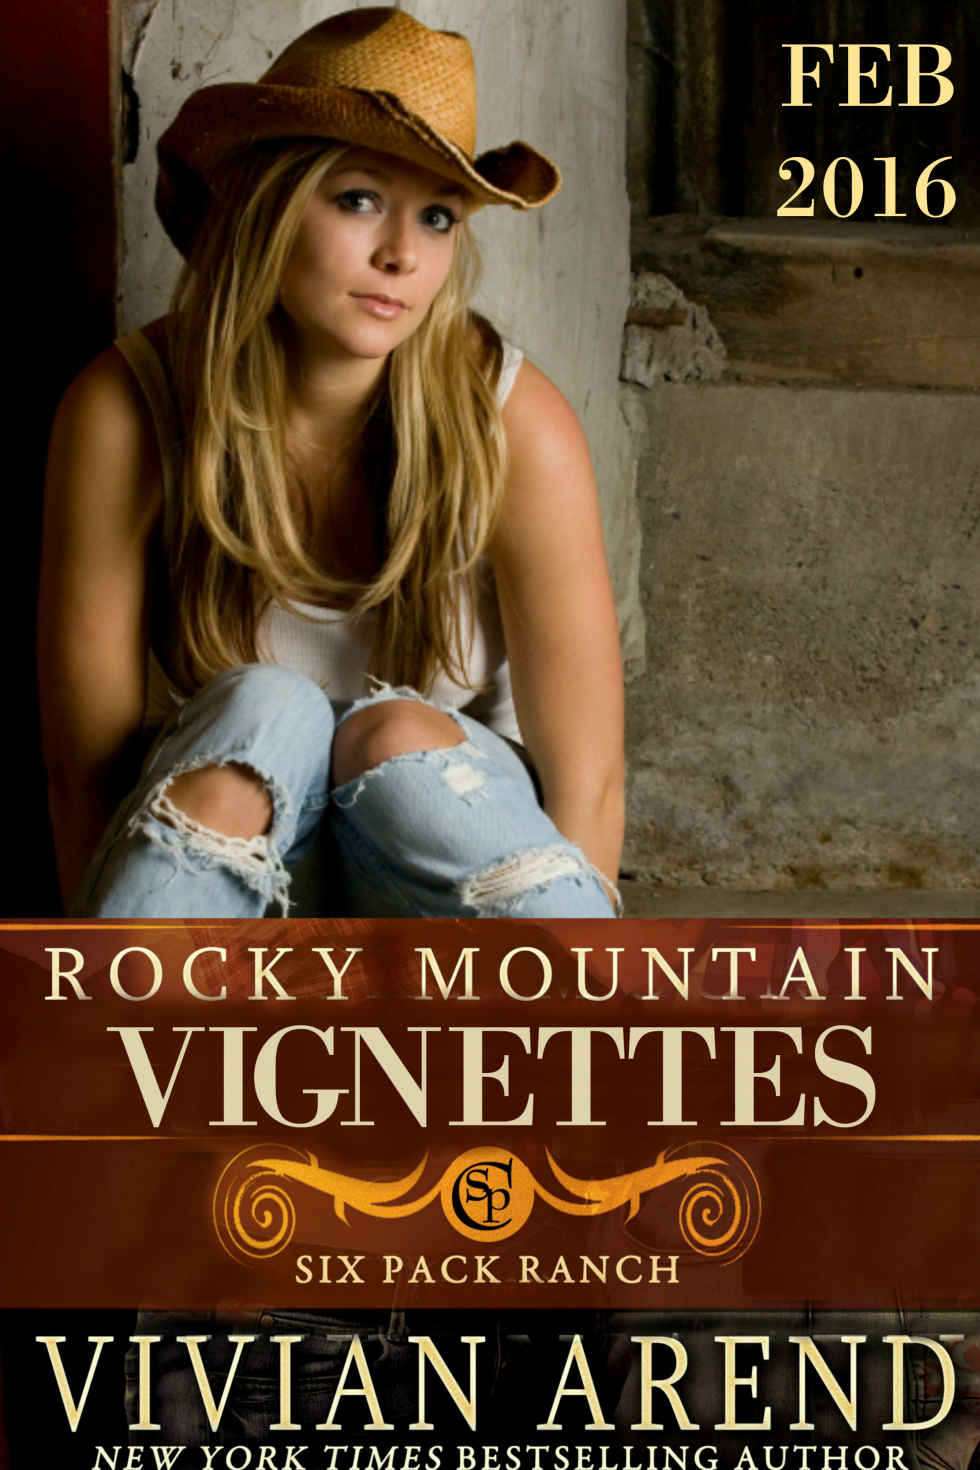 Rocky Mountain Vignettes (Six Pack Ranch) by Vivian Arend